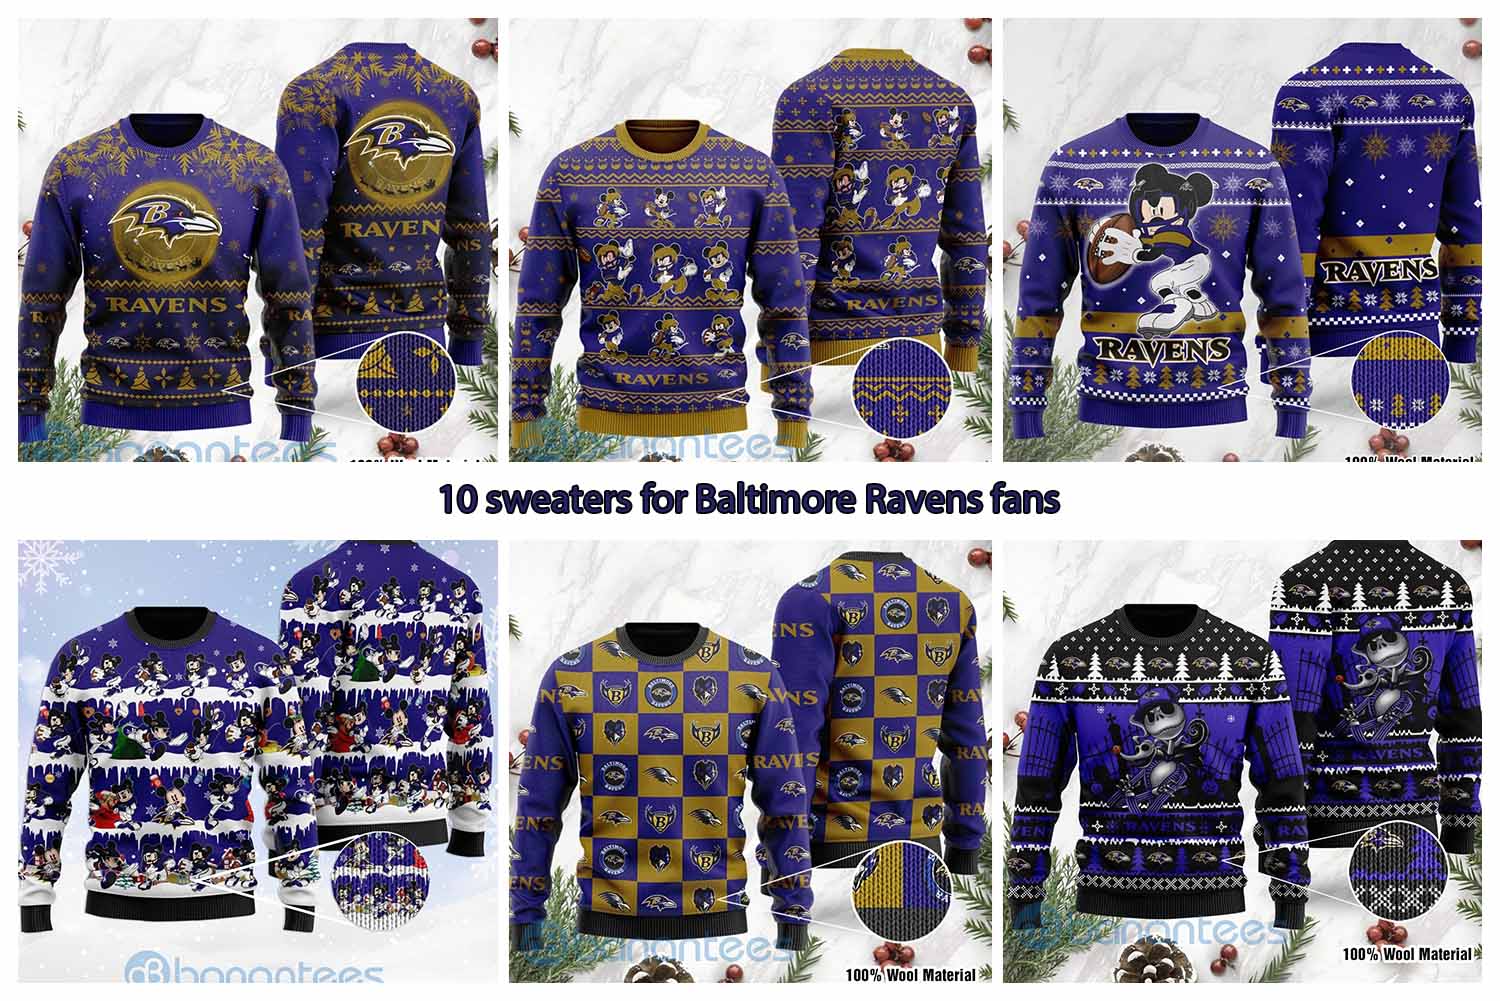 10 sweaters for Baltimore Ravens fans